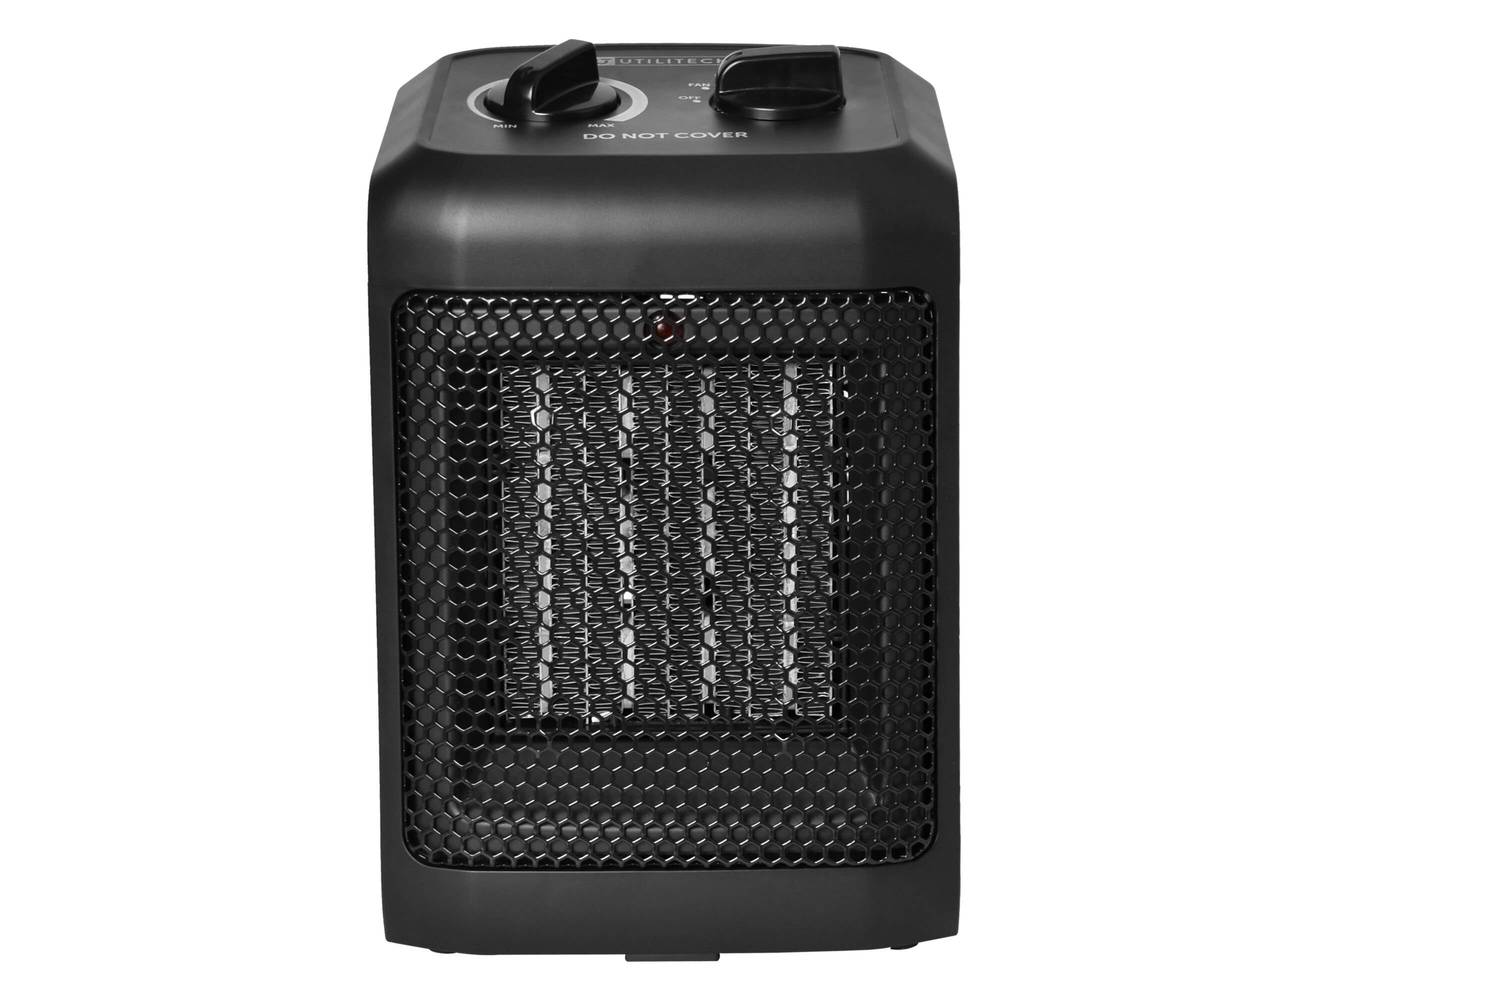 Utilitech Up to 1500-Watt Ceramic Compact Personal Indoor Electric Space Heater with Thermostat | BNT-15L2